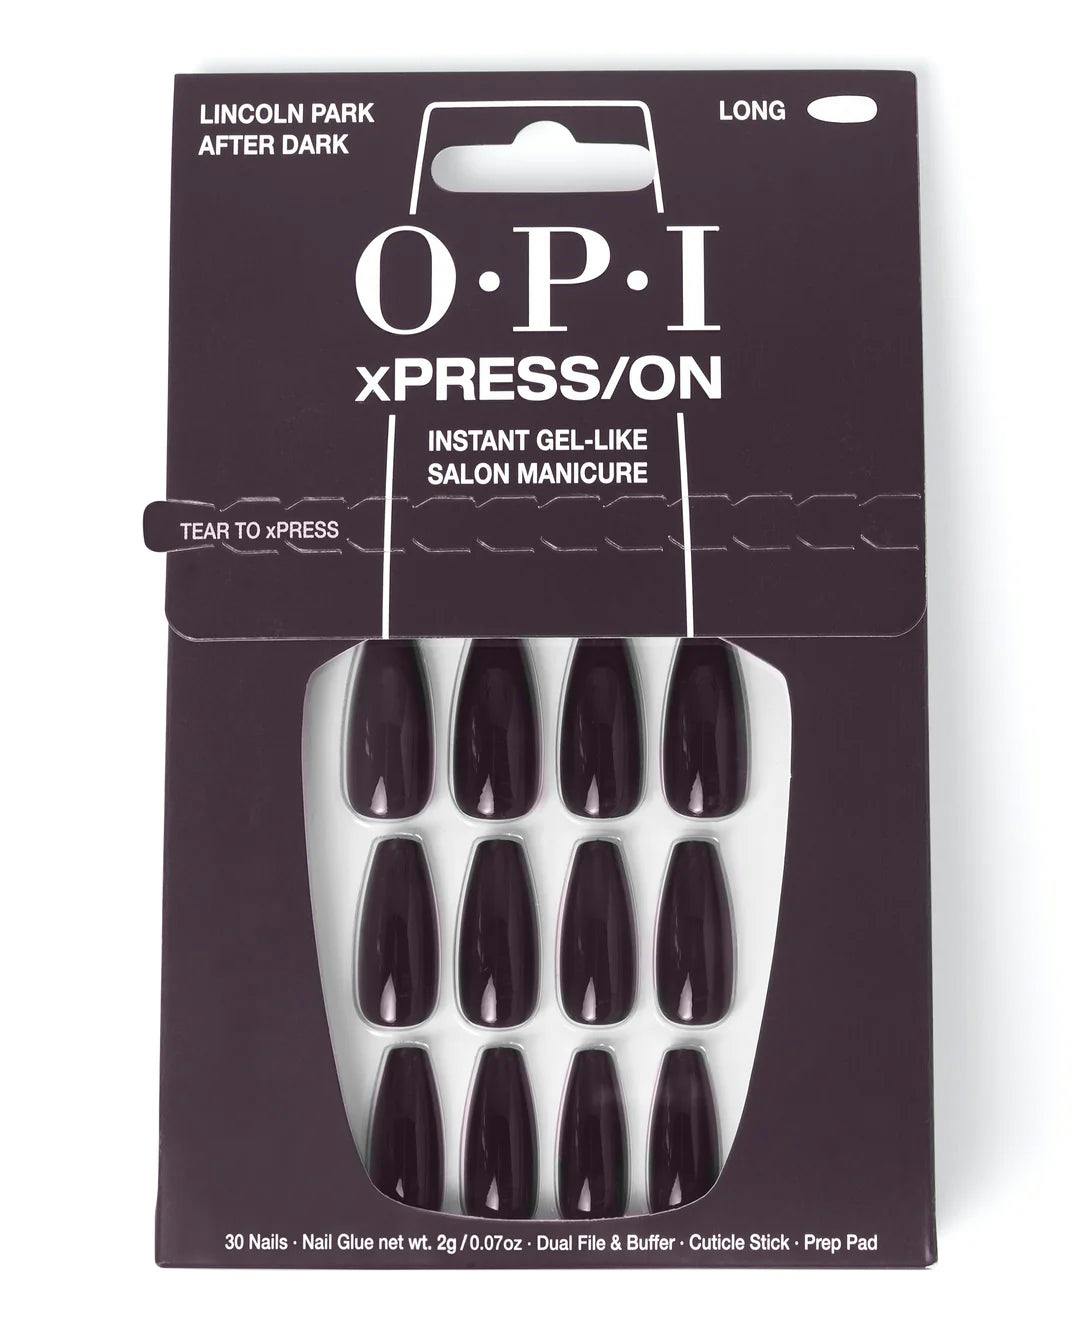 OPI xPRESS/ON Lincoln Park After Dark - LONG